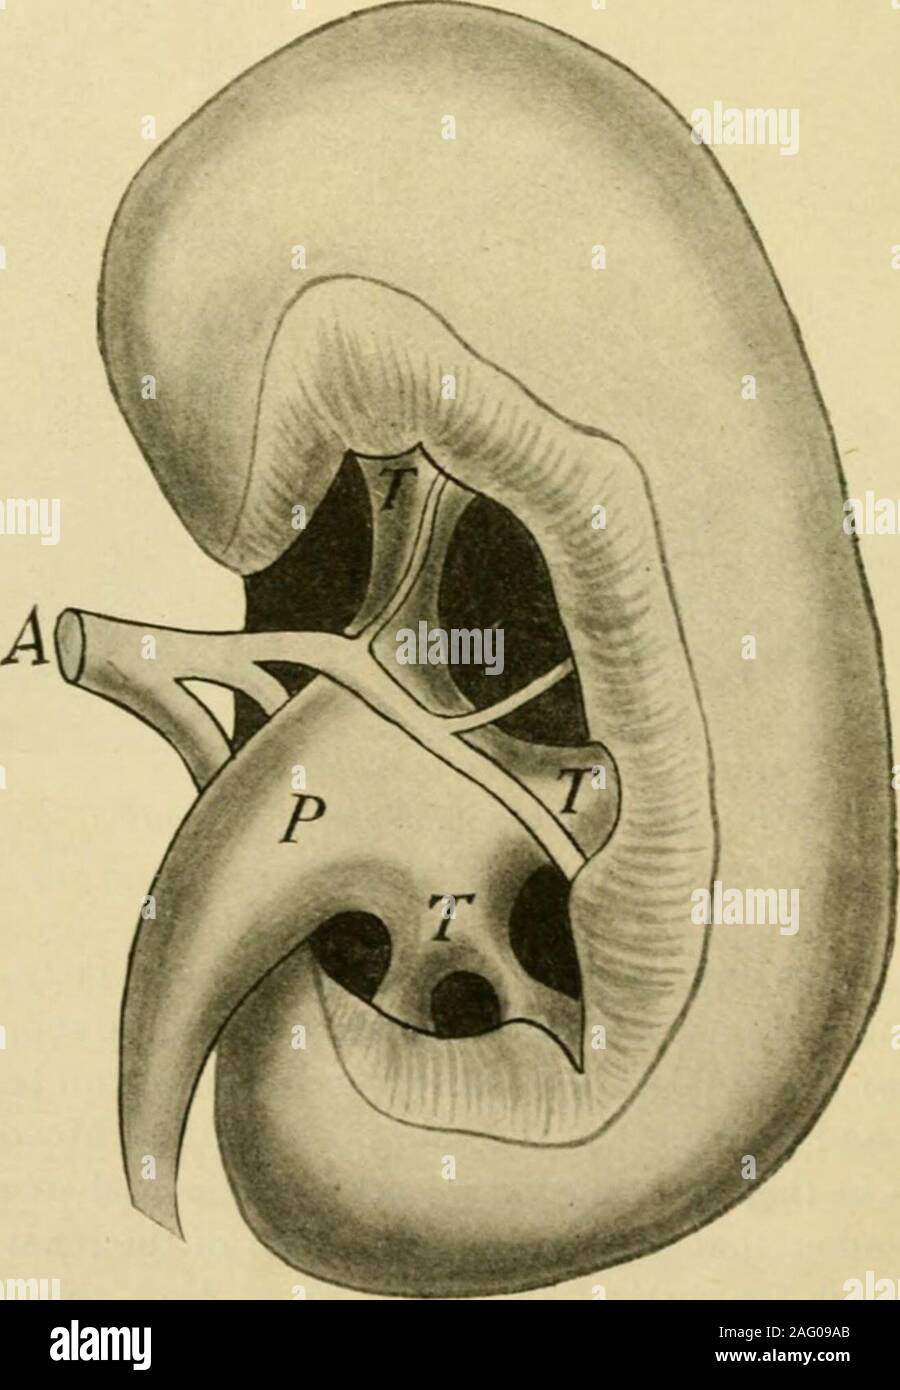 . Manual of operative surgery. Fig. 787.—{Poirier and Charpey.). Fig. 788. EXPLORATION KIDNEY 645 around the calices (Figs. 789 and 790). In the fatty tissue of the renal sinus liethe lymphatics and nerves of the kidney. From the preceding paragraphs it might seem that the sinus of the kidneywas always the same shape and bore the same relationship to the pelvis. Thiswould be far from the truth. Fig. 791 shows a kidney in which there is little notching of the inner borderof the kidney and in which most of the renal pelvis lies in an accessible position, Stock Photo